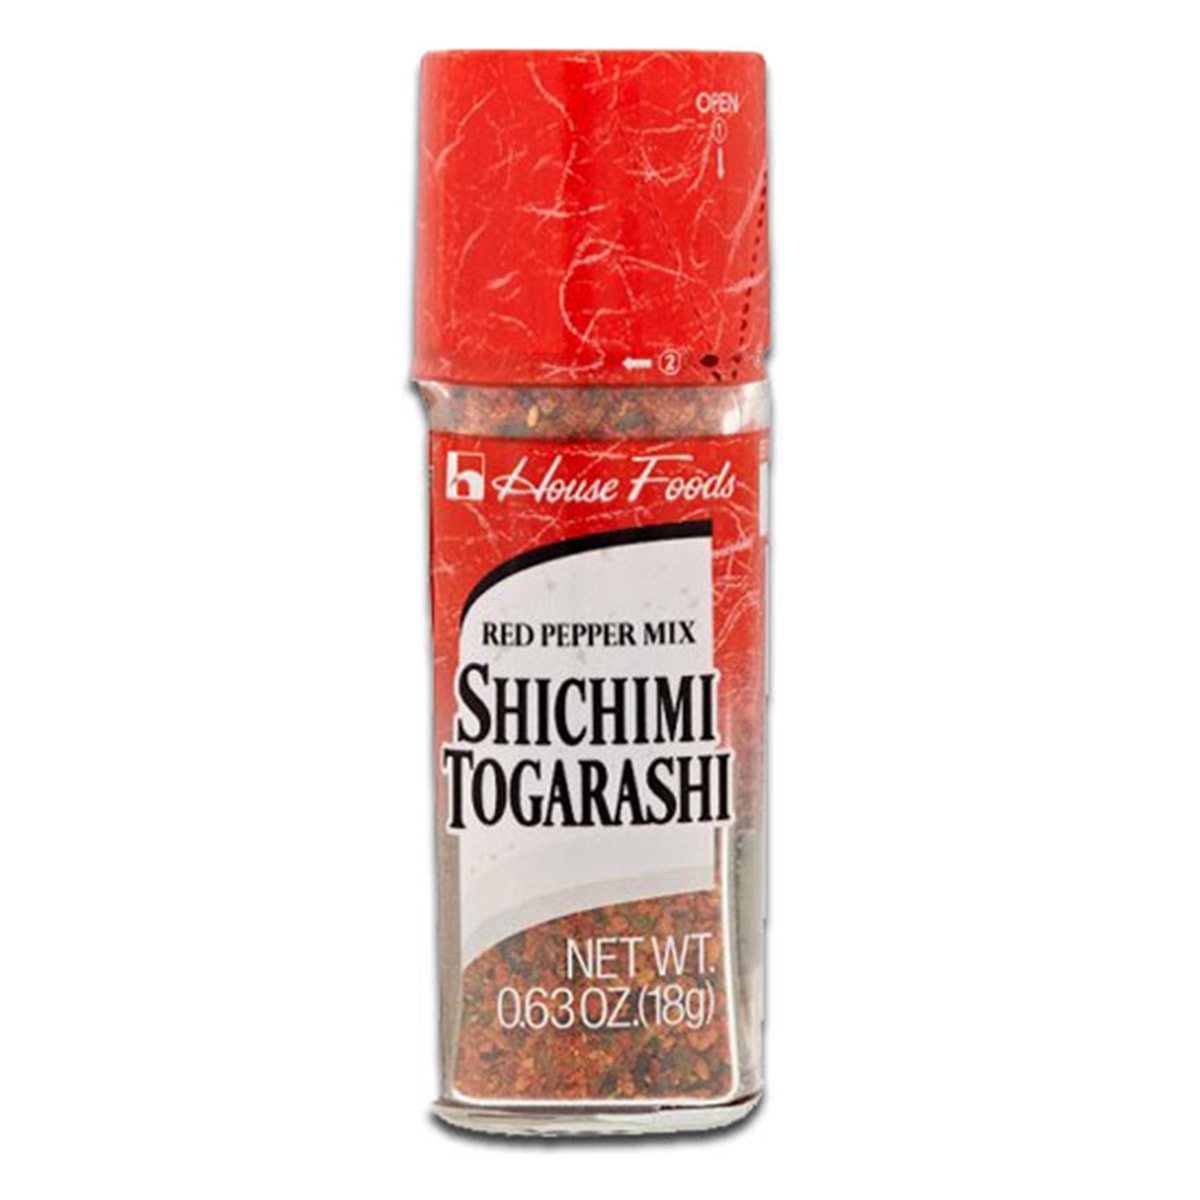 Buy House Foods Shichimi Togarashi (Japanese Red Pepper Mix of 7 Spice) - 18 gm